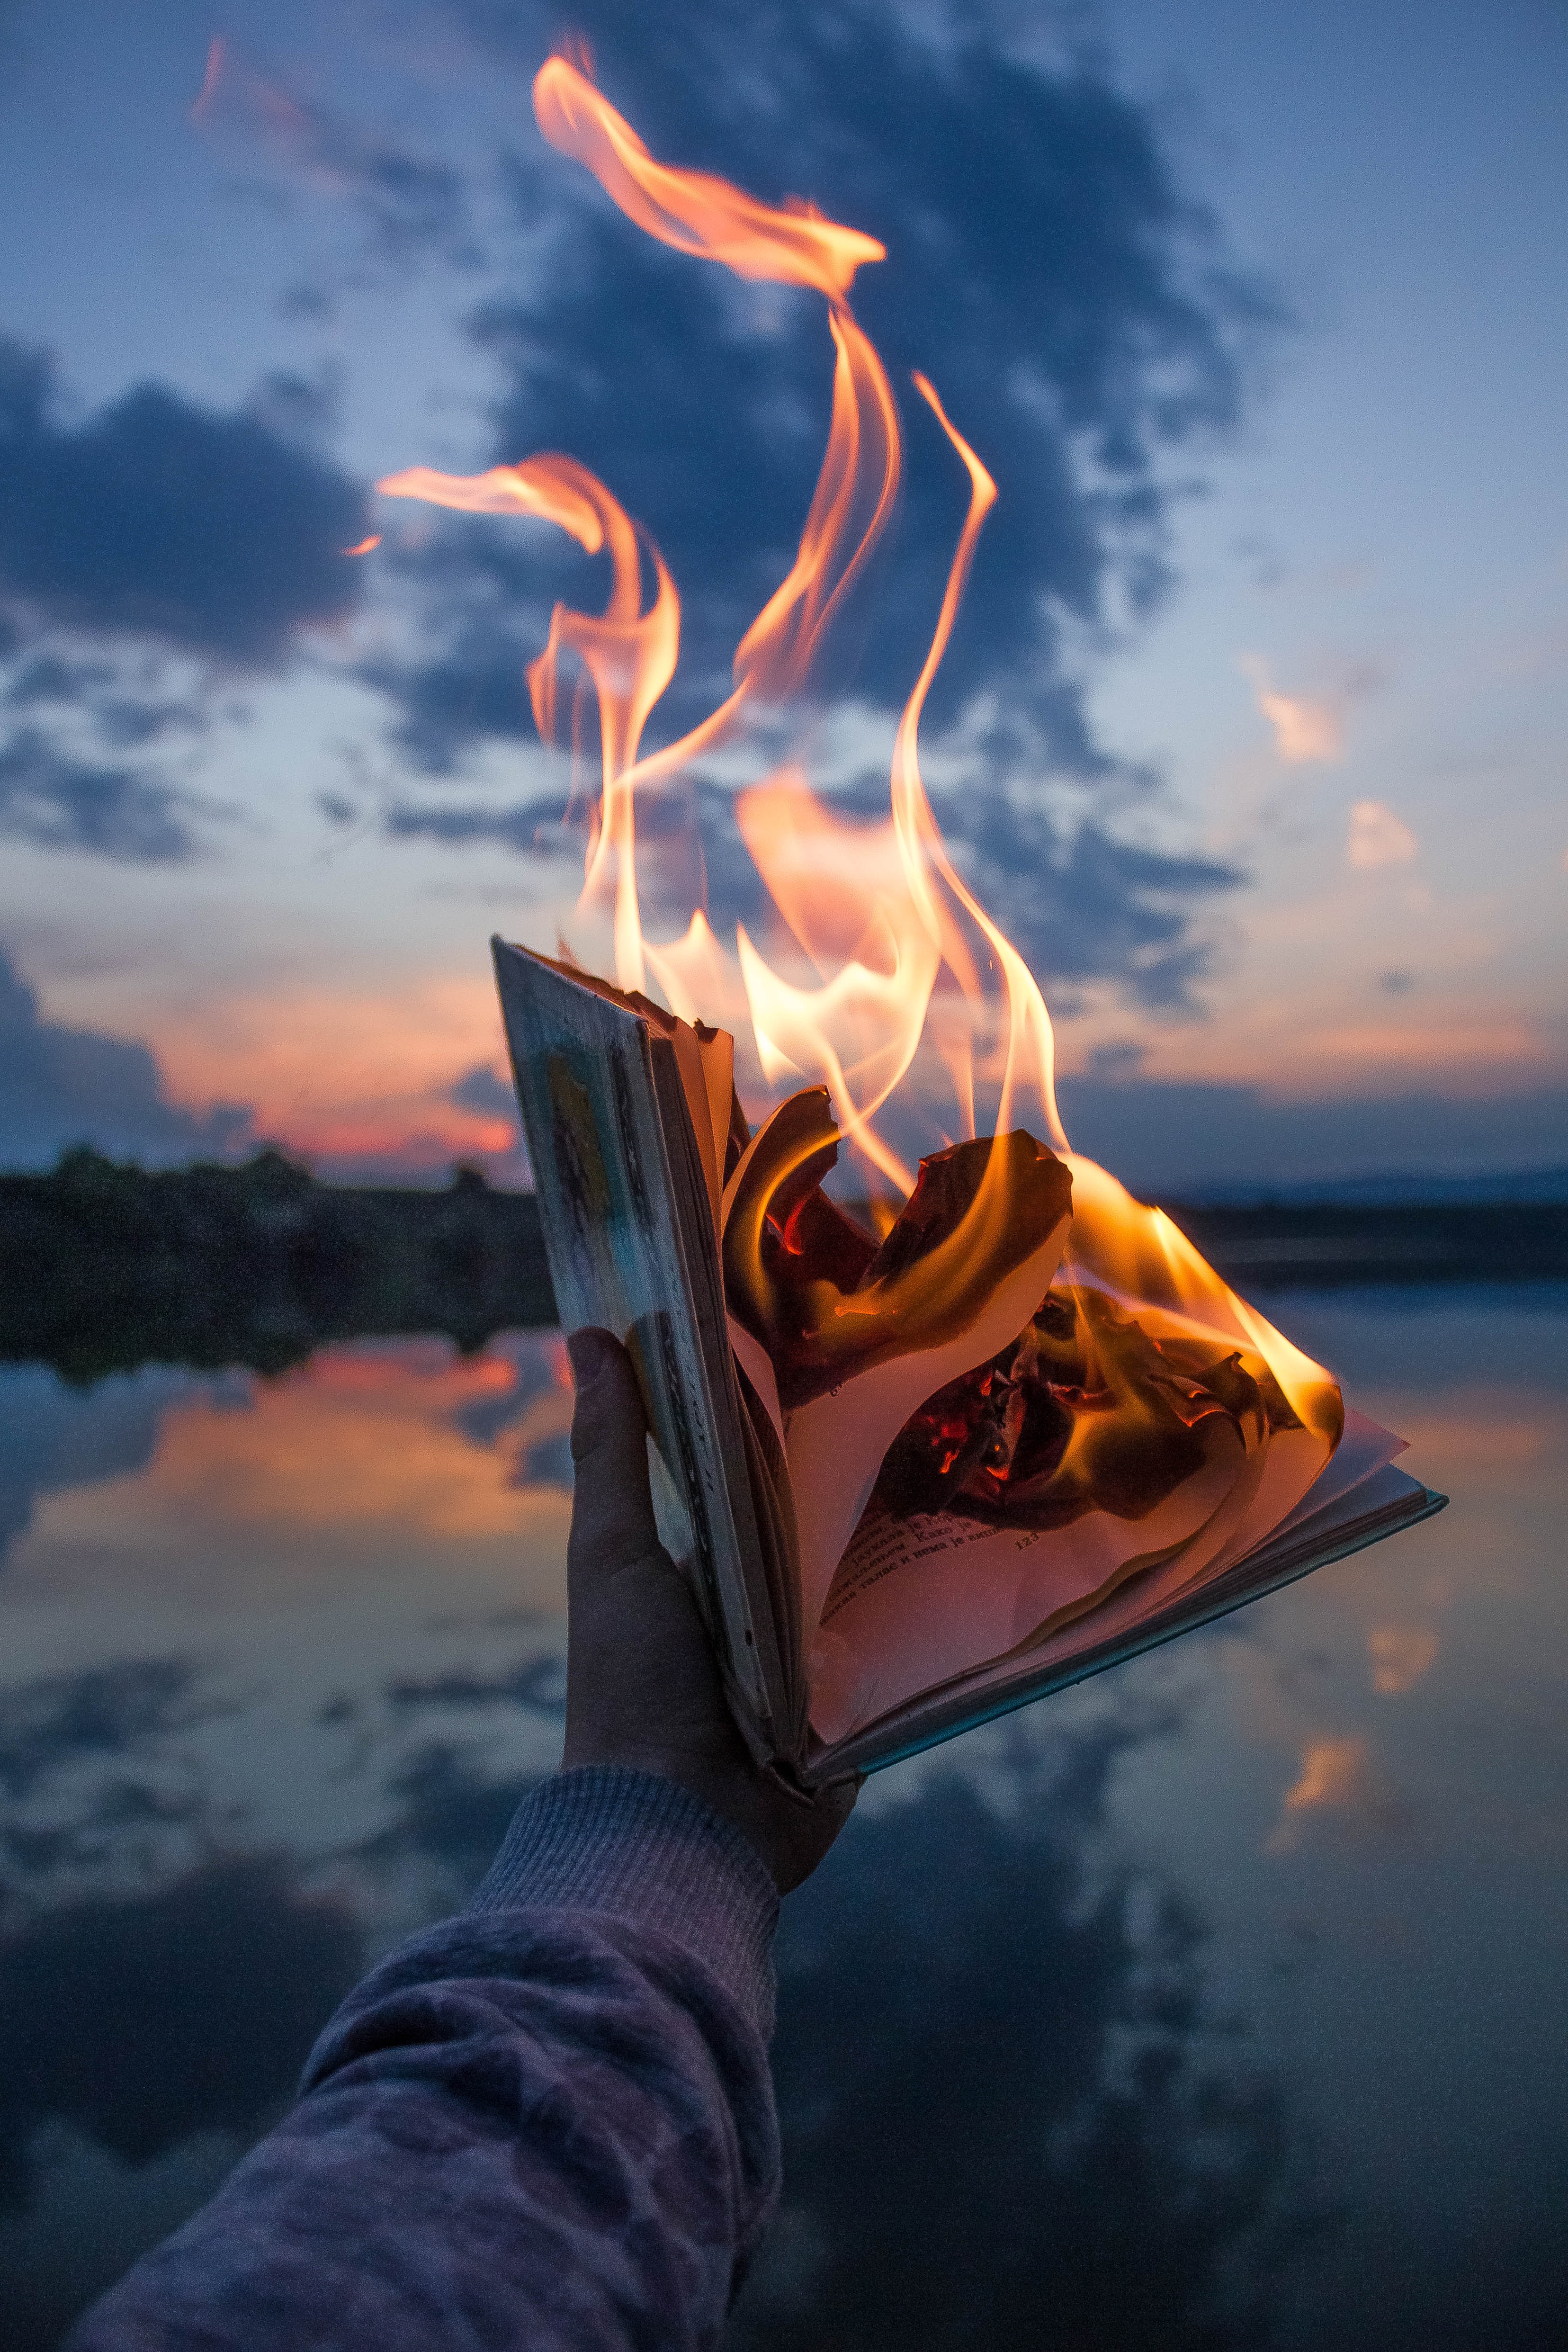 android miscellanea, hand, flame, twilight, fire, dusk, miscellaneous, book